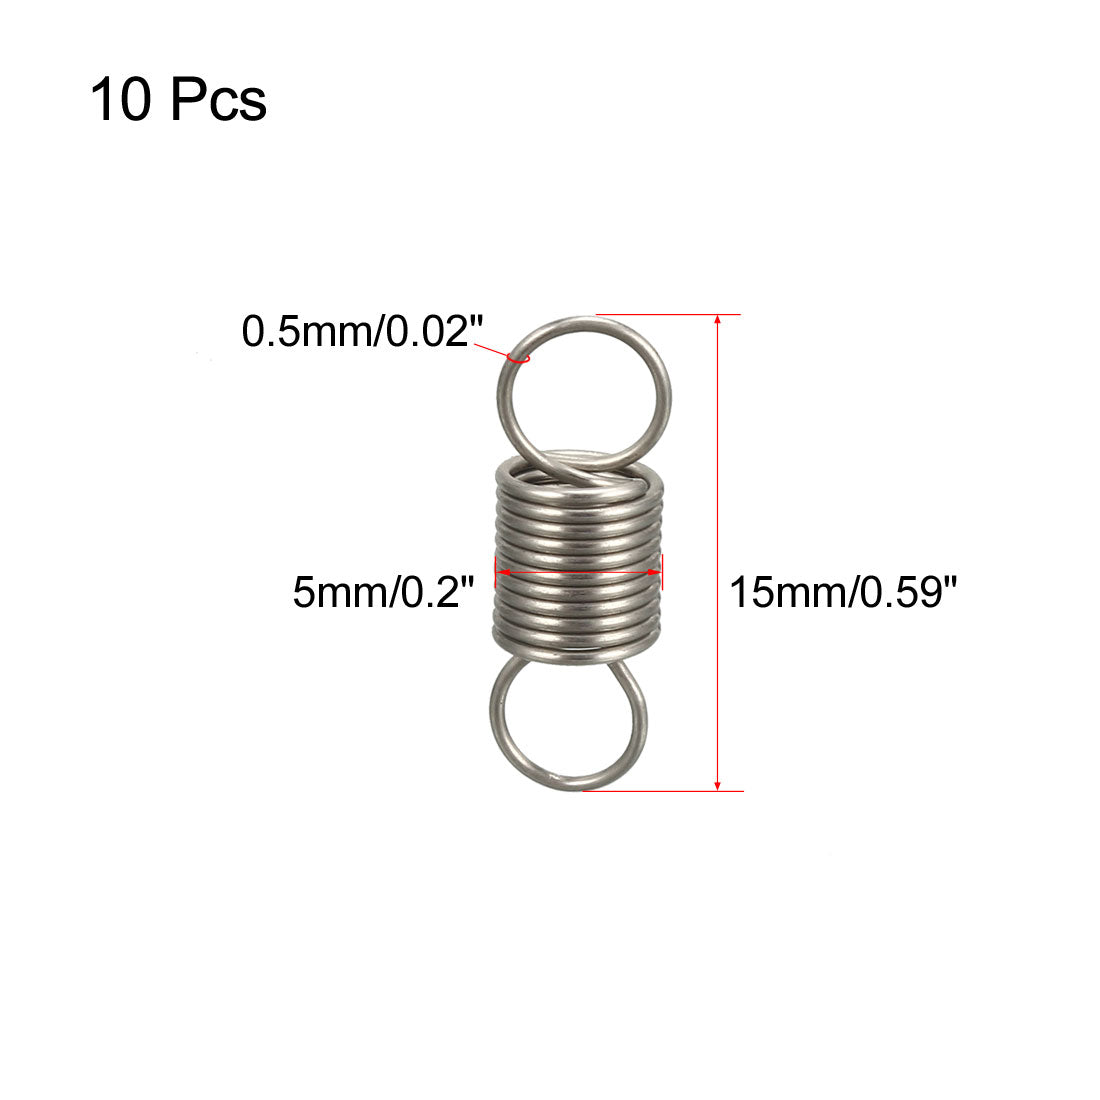 uxcell Uxcell Extended Tension Spring Wire Diameter 0.02", OD 0.2", Free Length 0.59" 10pcs